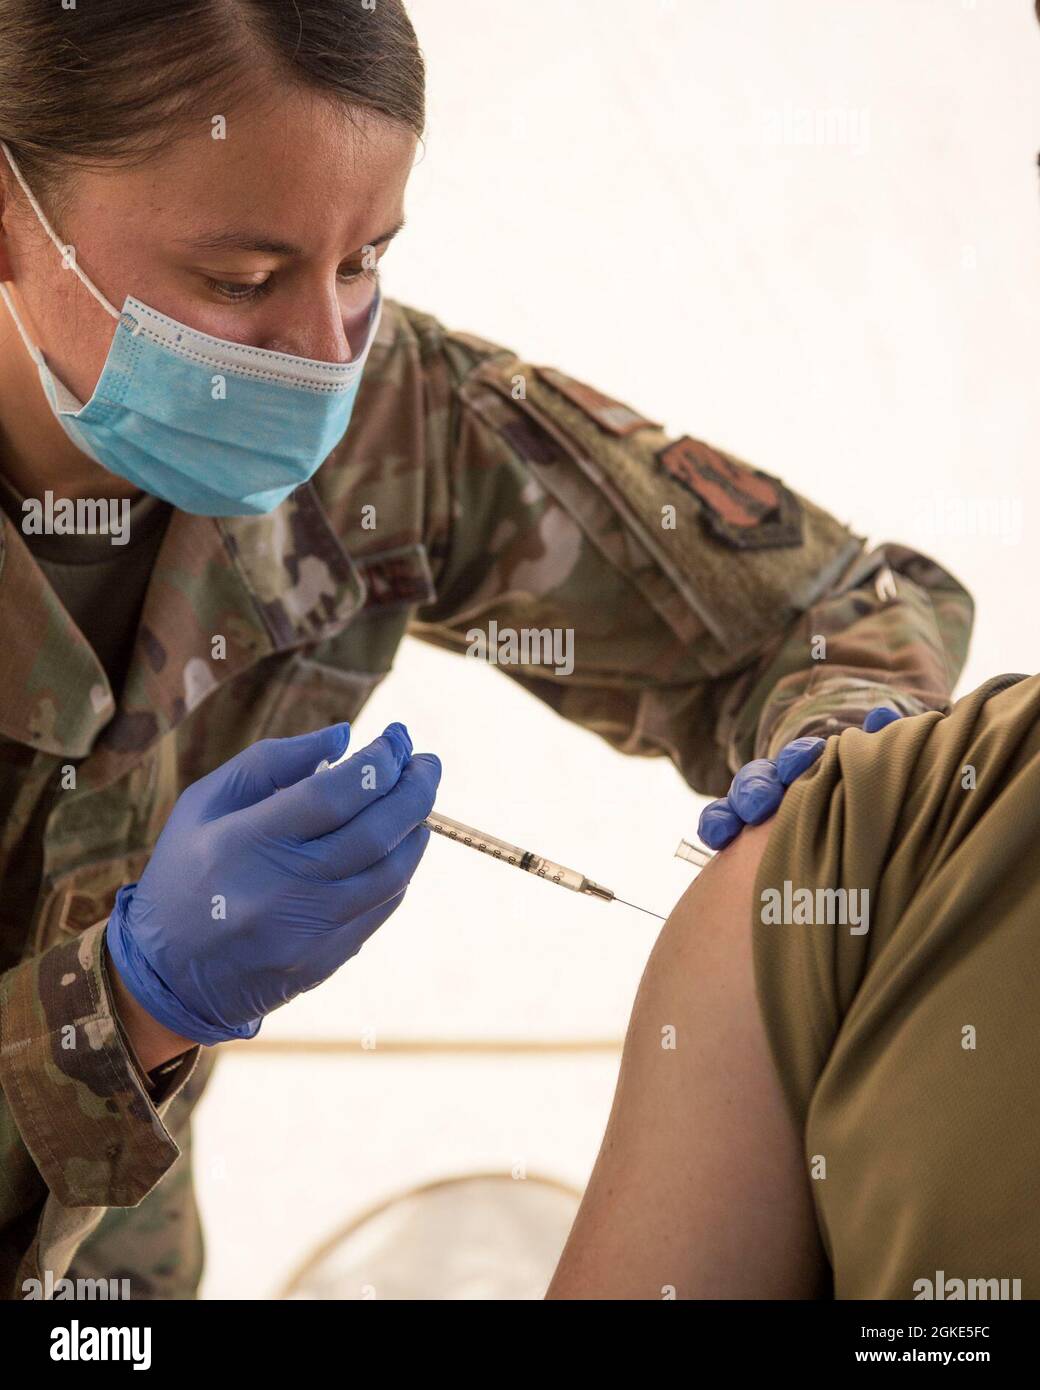 Tech. Sgt. Desiree Ng, a 149th Medical Group Medical Technician with the 149th Medical Group administers a COVID-19 vaccination, March 25, 2021 at Joint Base San Antonio-Lackland, Texas. The 149th Medical Group is ensuring that we keep our Airmen healthy and vaccinated so that they can be mission ready to meet the needs for the Air Force. Stock Photo